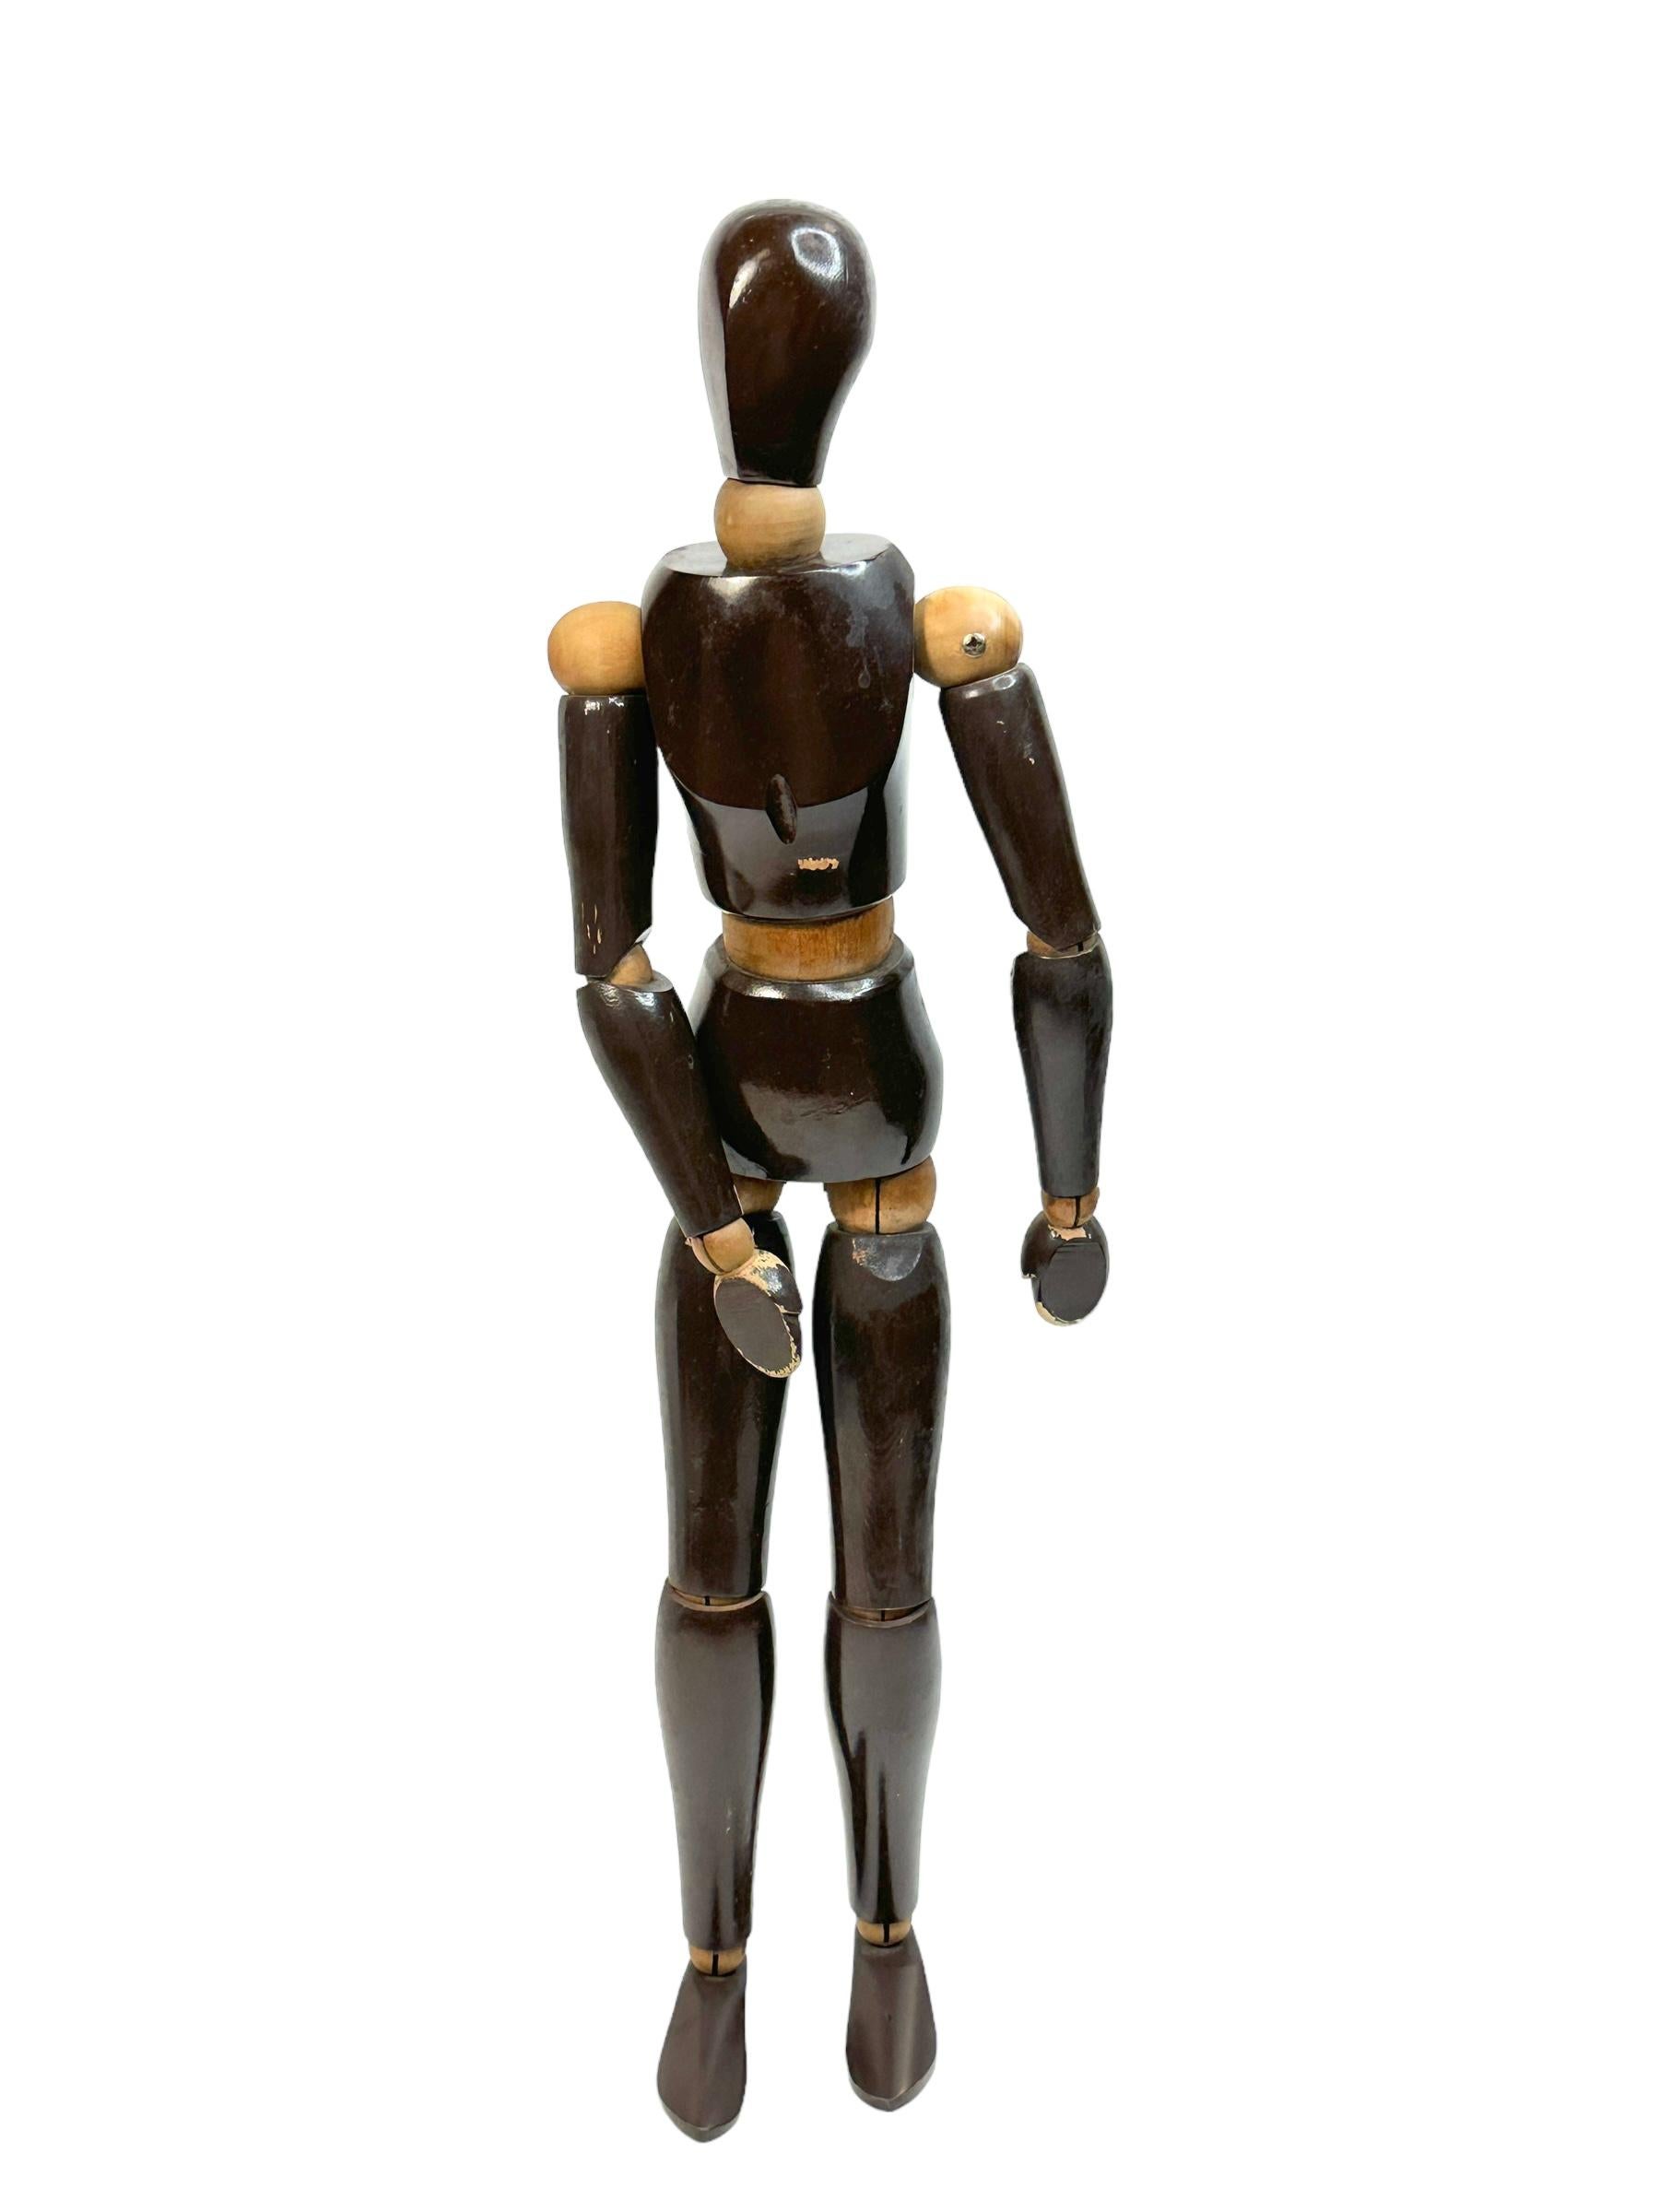 Large Art Deco Traditional Wooden Artist Mannequin Model, Italy 1930s